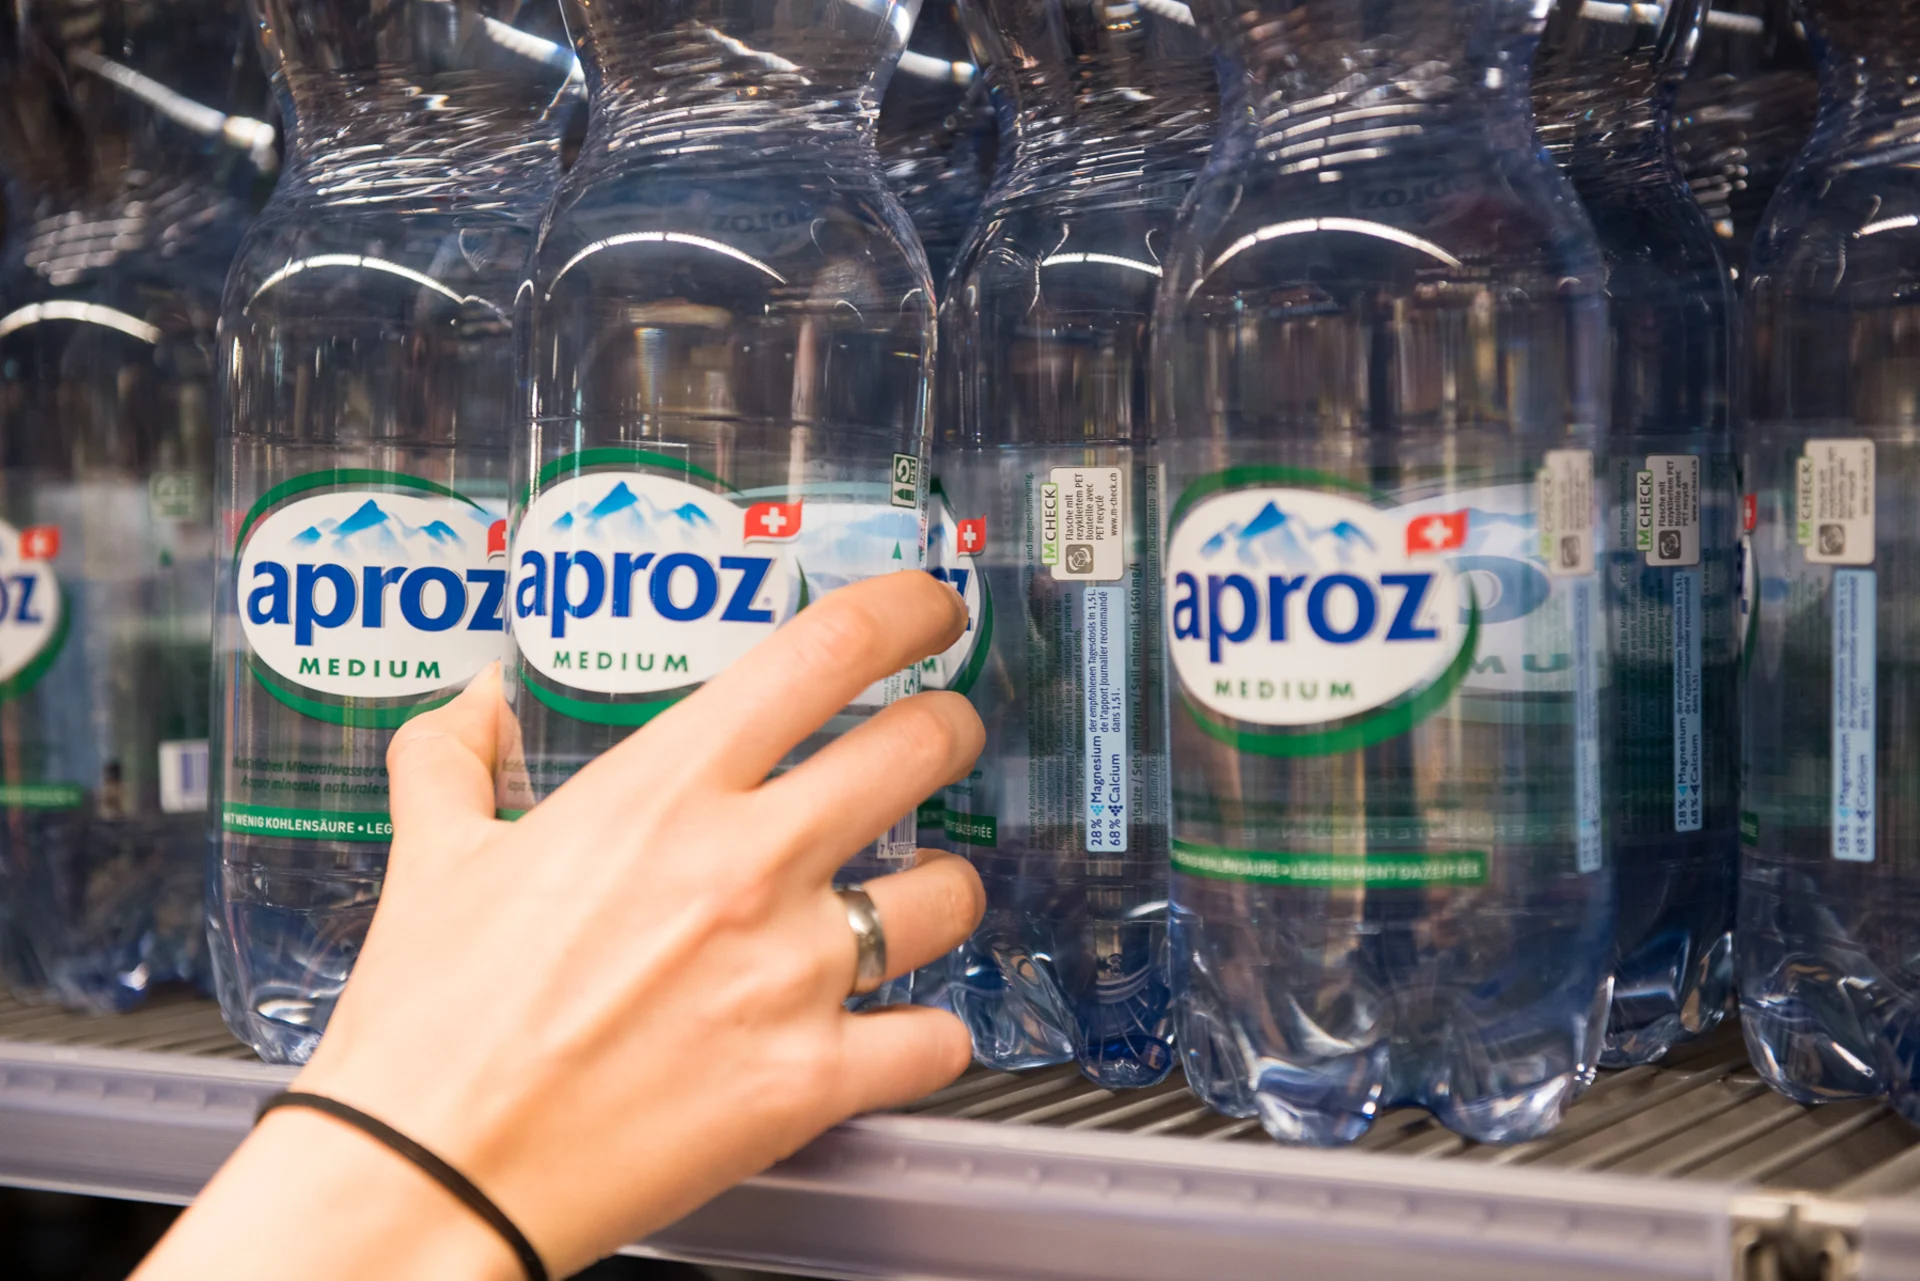 A hand reaches for an Aproz bottle on a shelf in Migros.